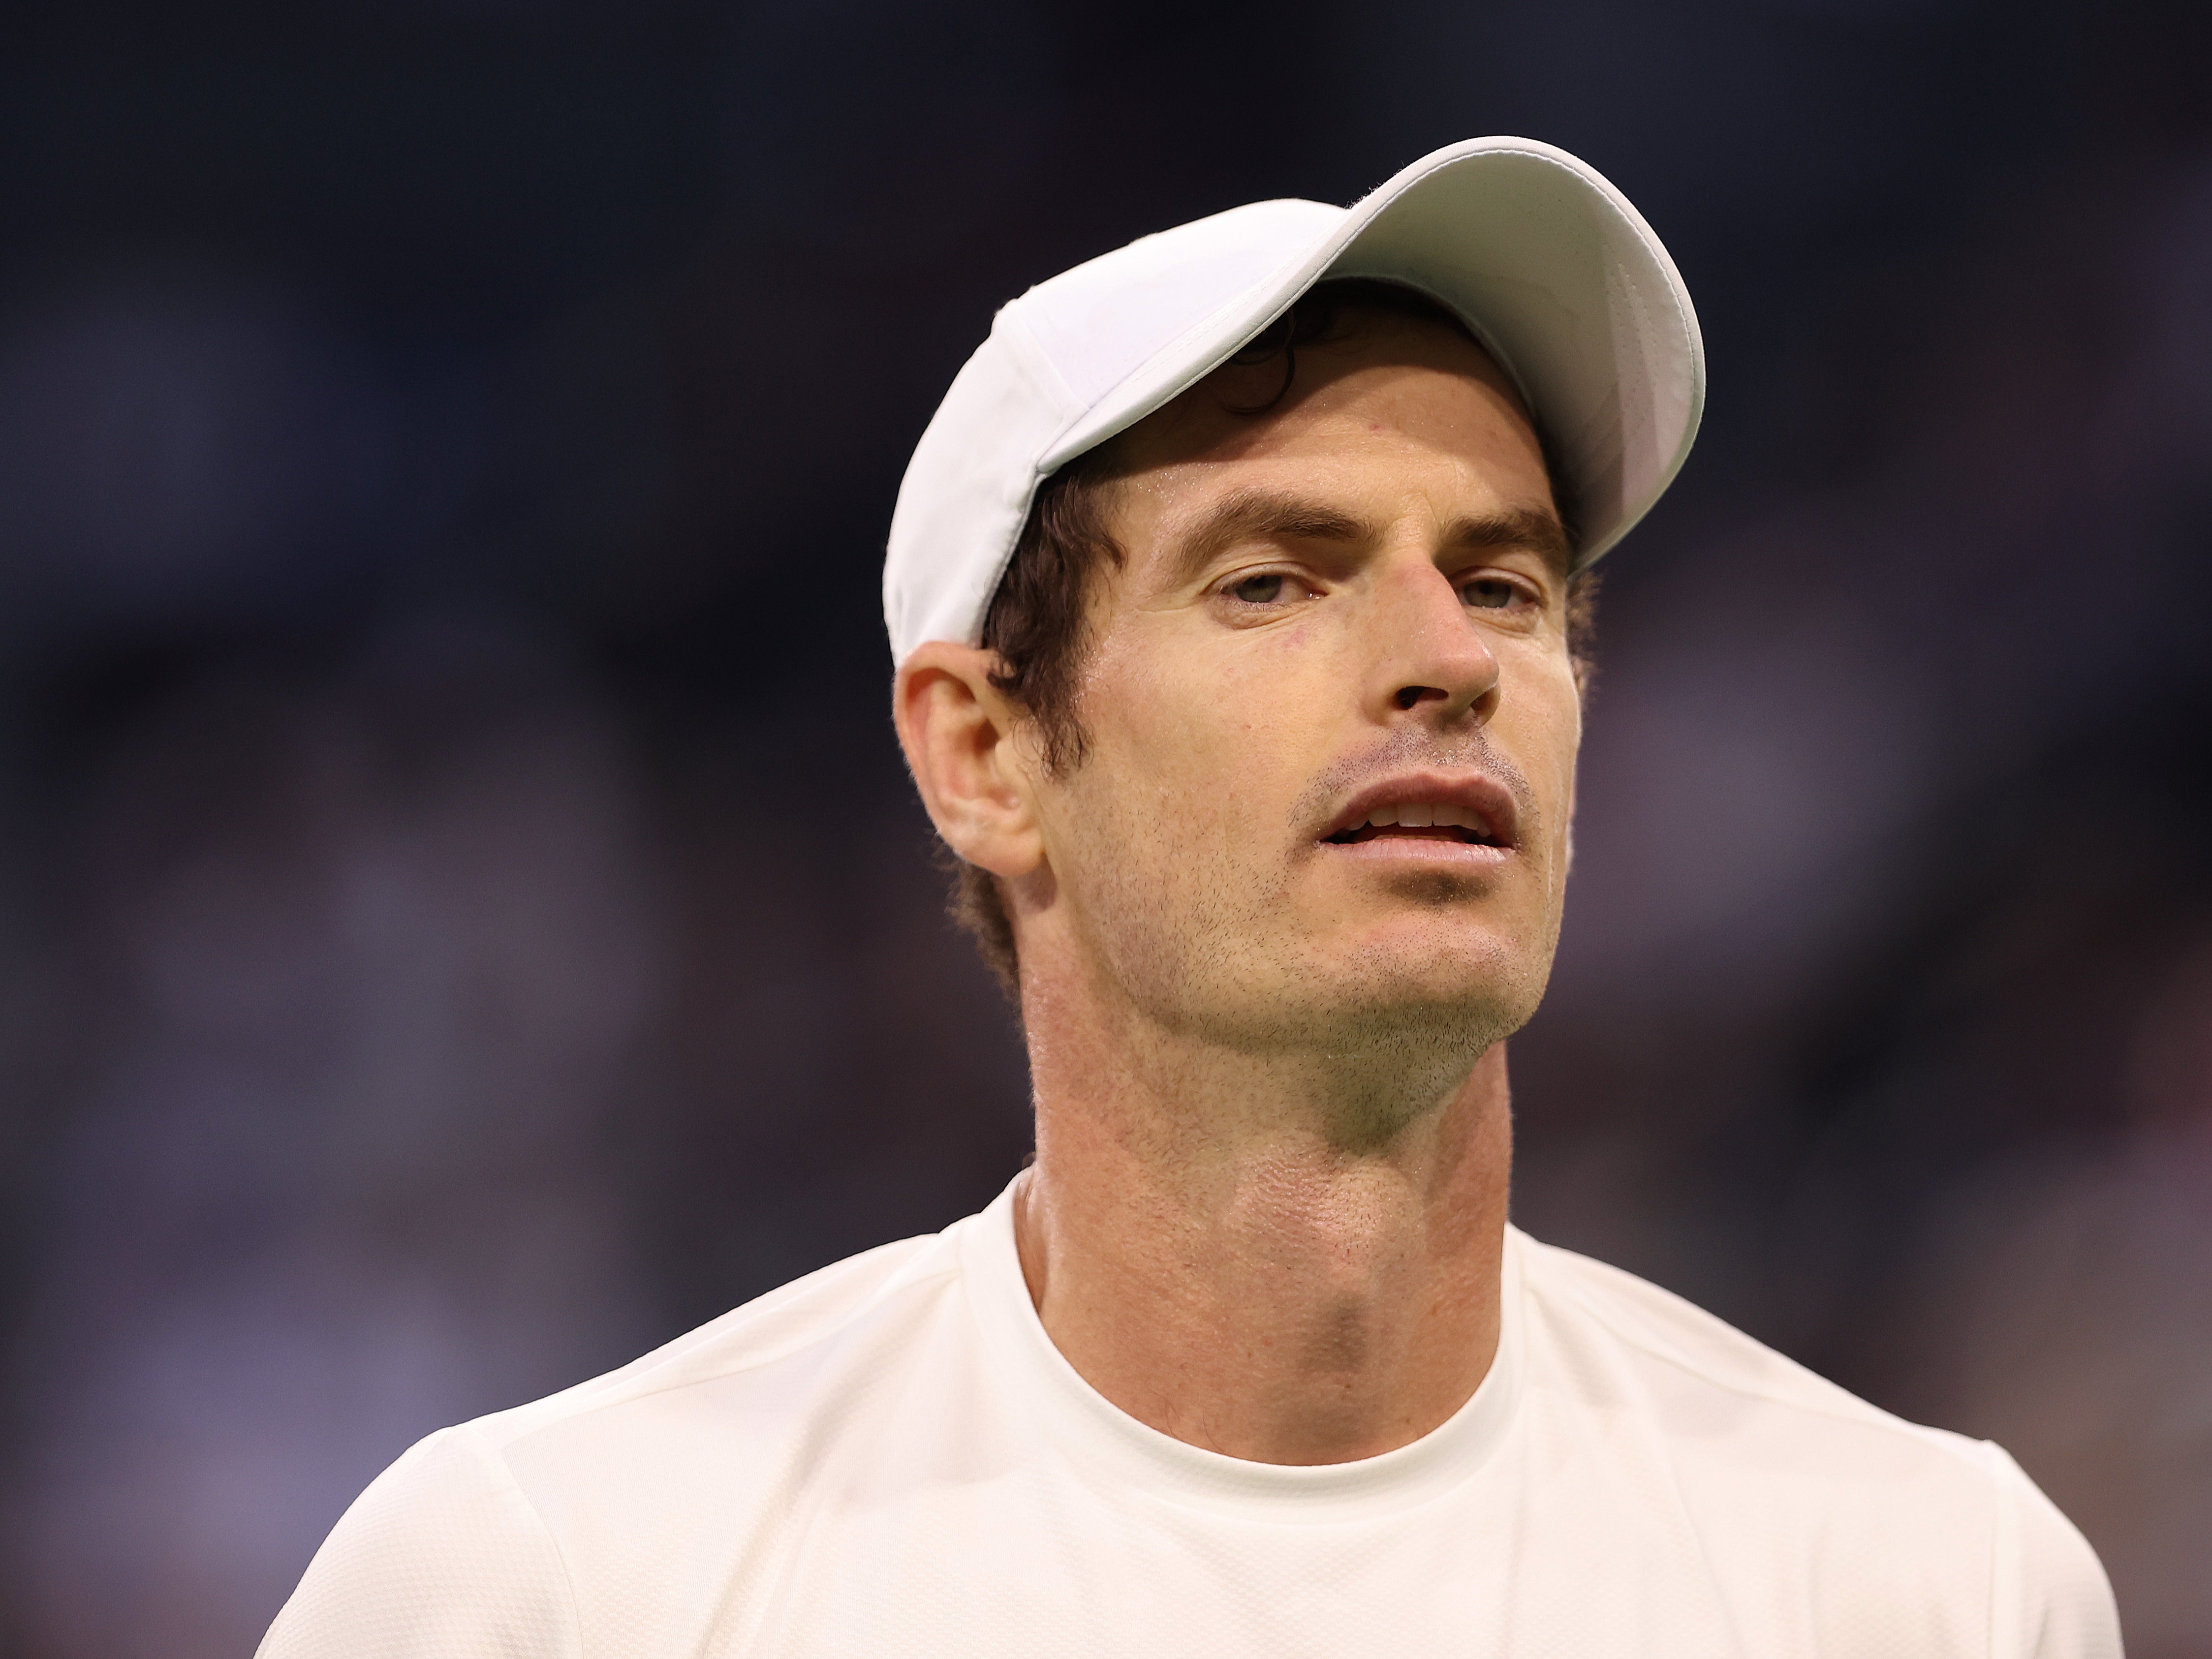 Andy Murray has tipped a top talent as someone who could define an era of men’s tennis